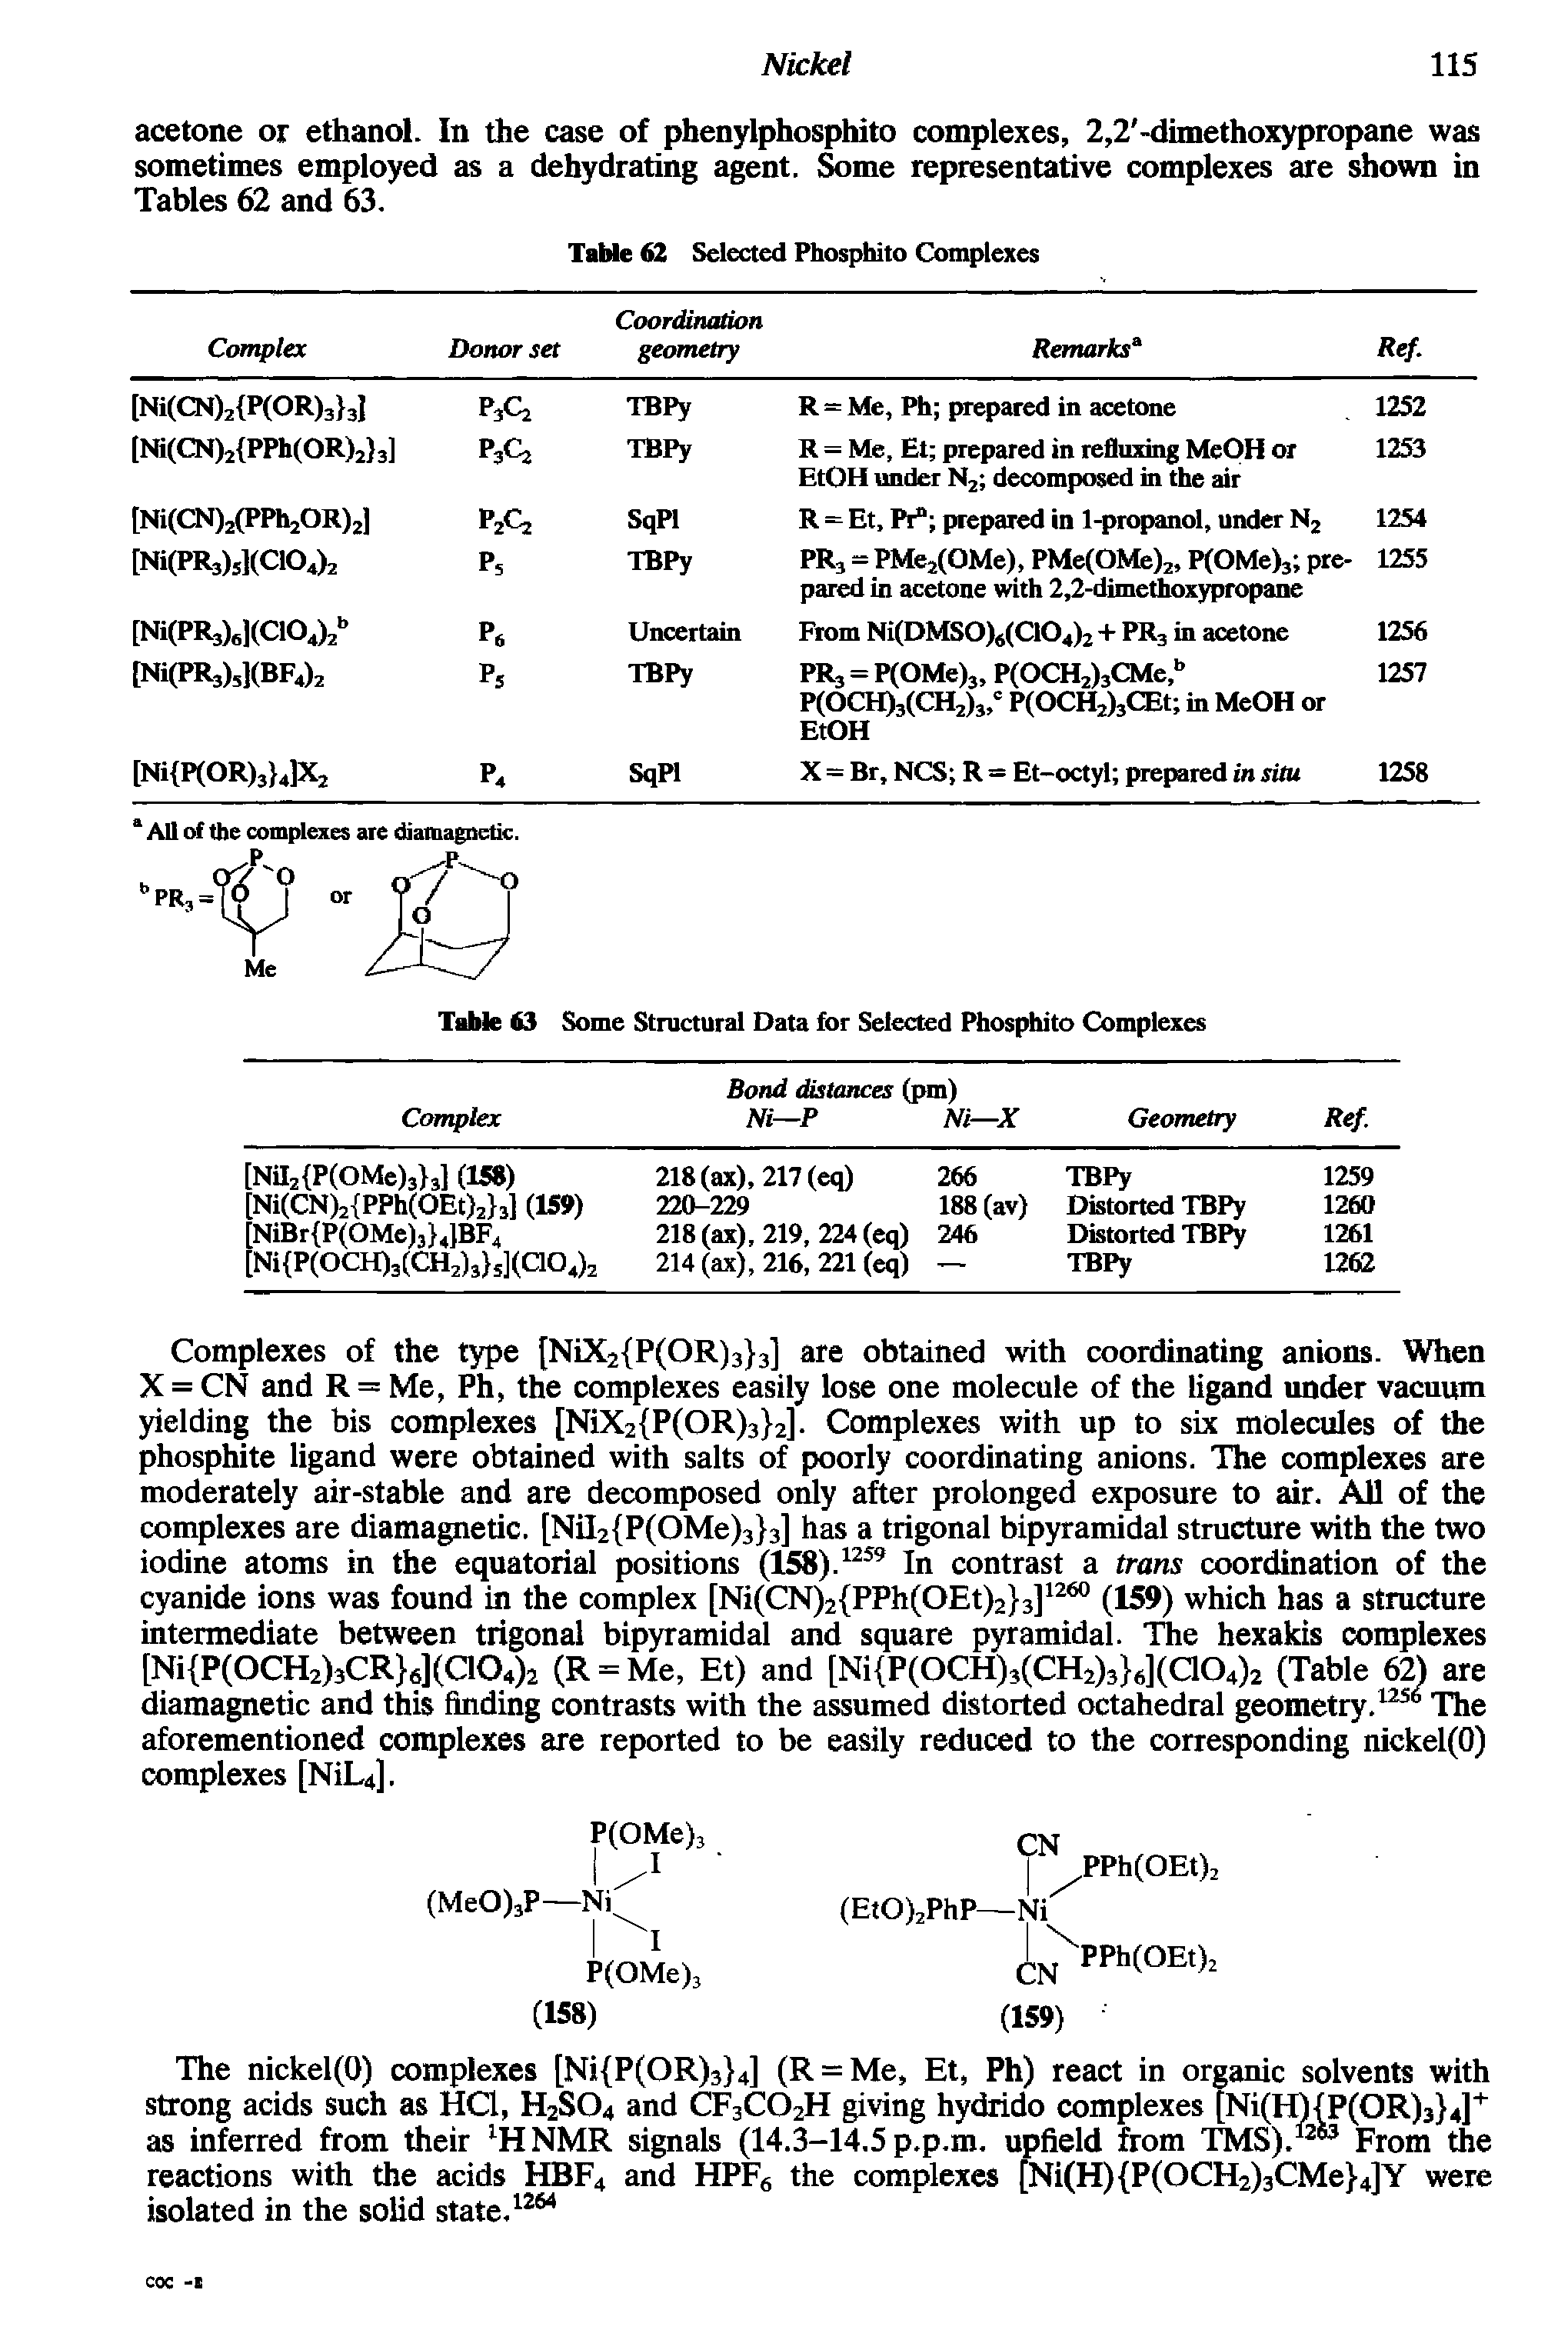 Table (3 Some Structural Data for Selected Phosphito Complexes...